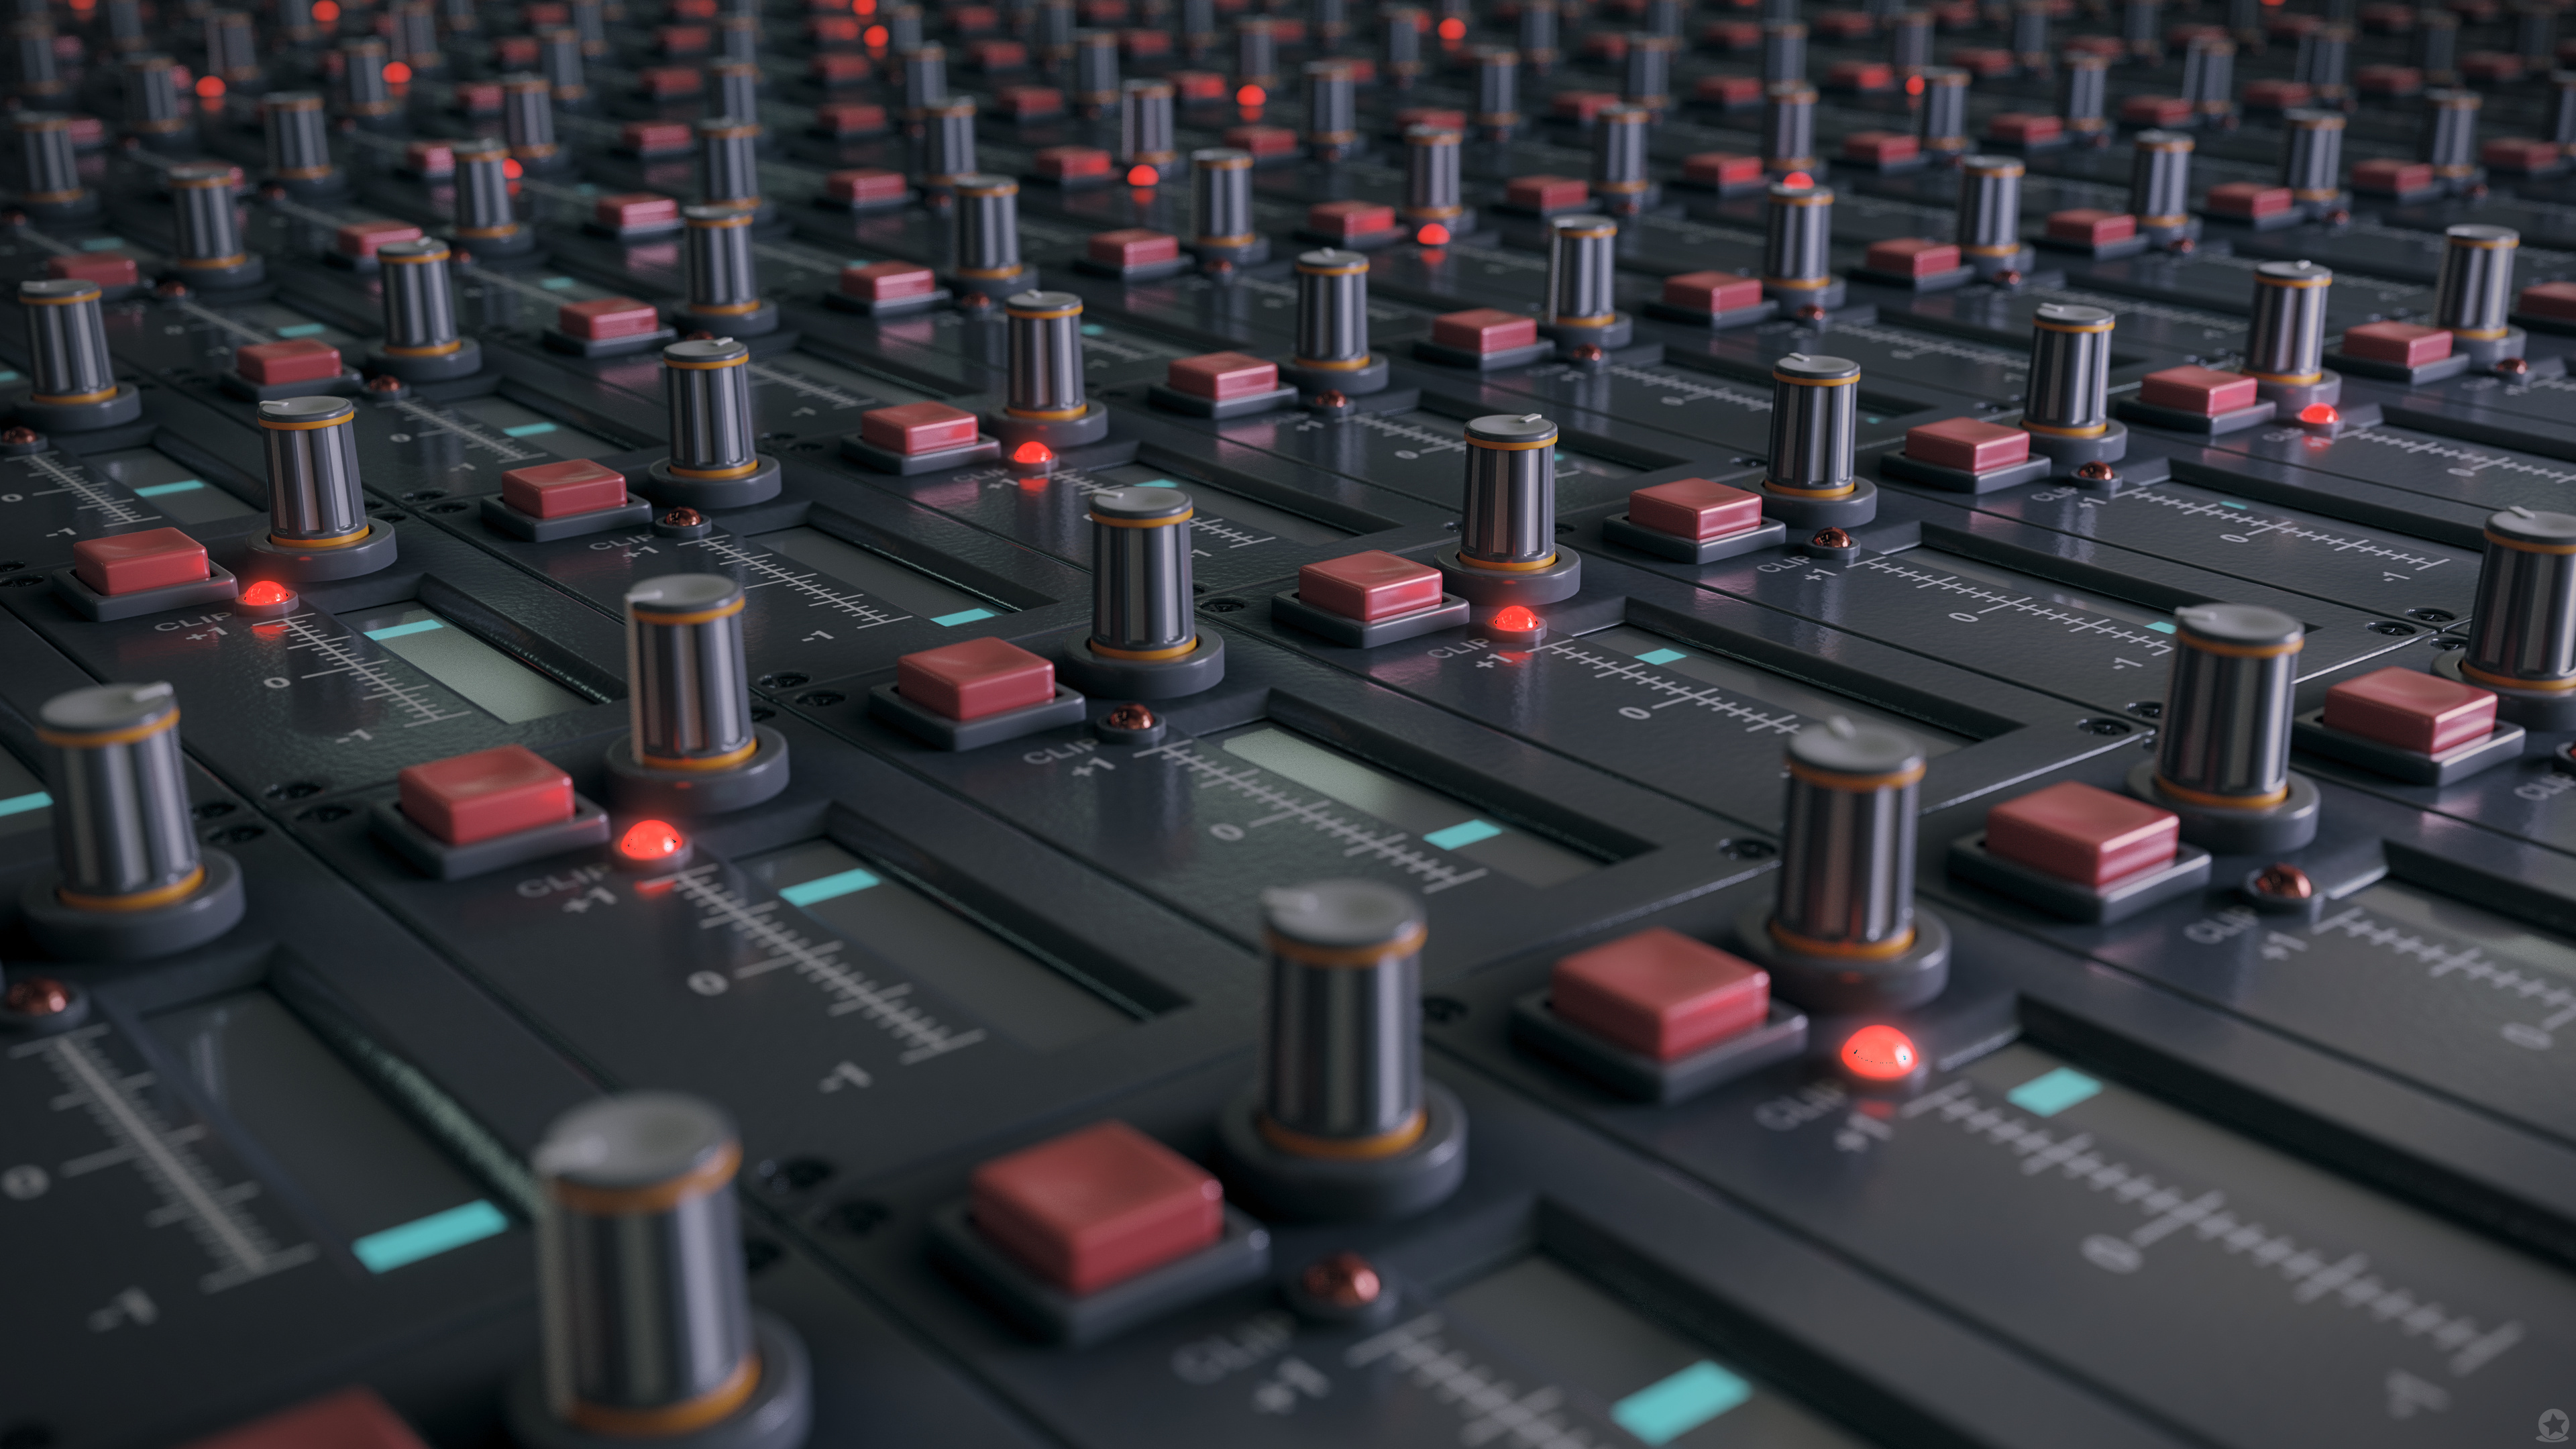 General 3840x2160 mixing consoles sound mixers sound perspective CGI Blender technology LEDs buttons digital art